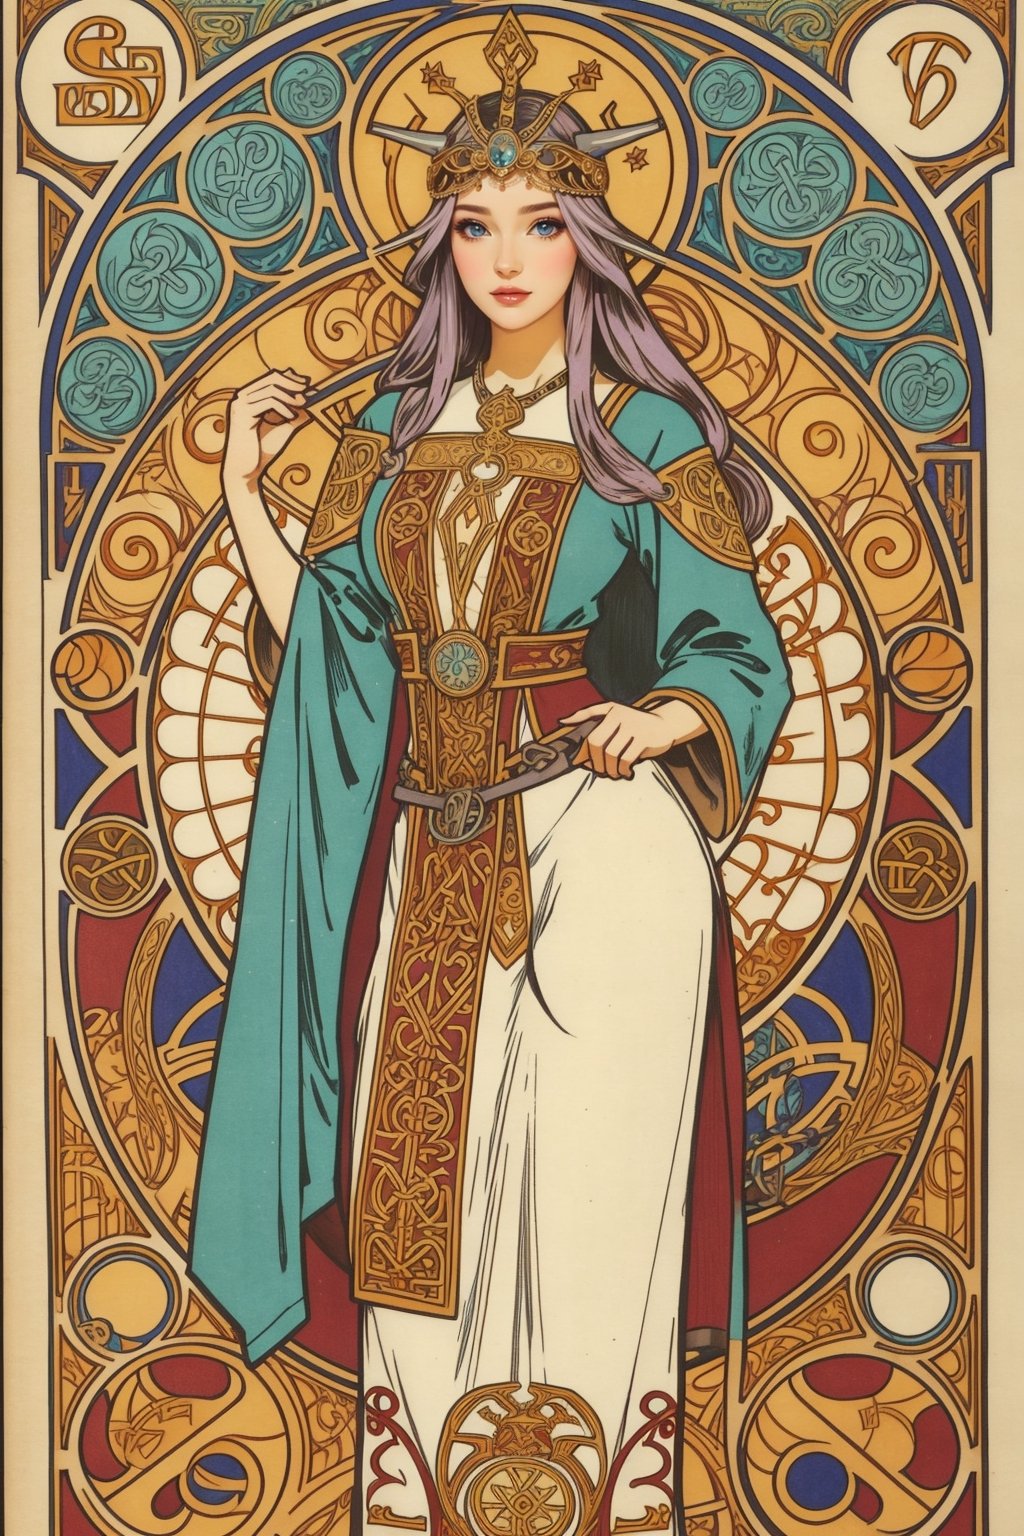 Viking Princess, old school, Art Nouveau pattern, the style of Artist Mucha, style of Beautiful hair, Viking head dress and clothes, head to toe princess.